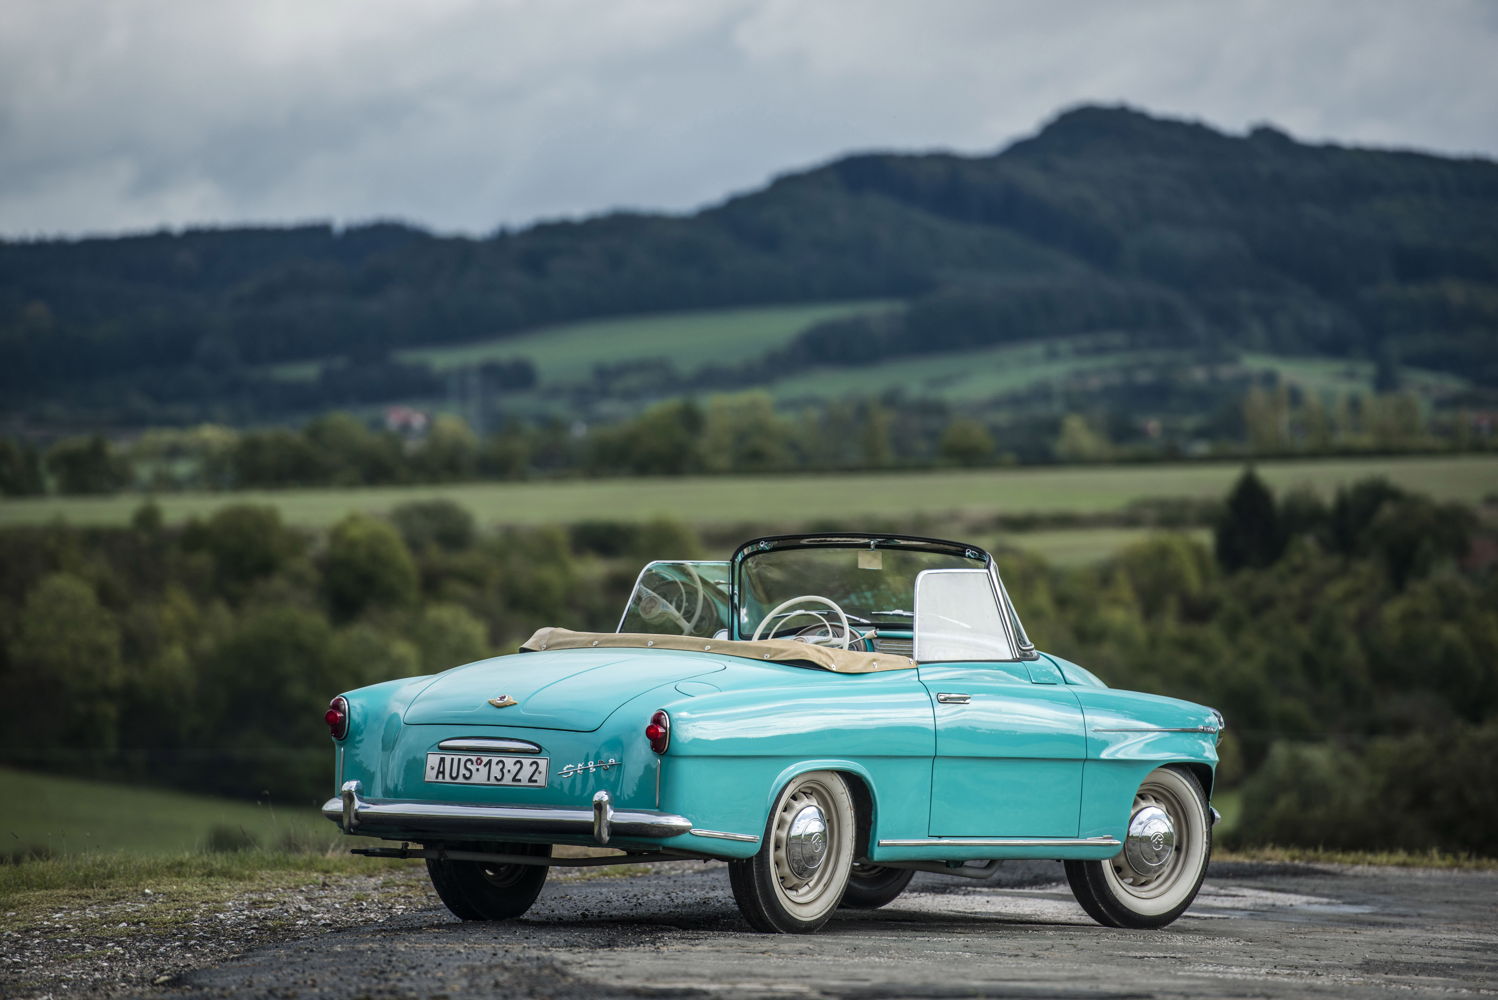 From February 1959, the successor to the ŠKODA 450, the ŠKODA FELICIA (photo), rolled off the production line. This model was also manufactured in Kvasiny until 1964.